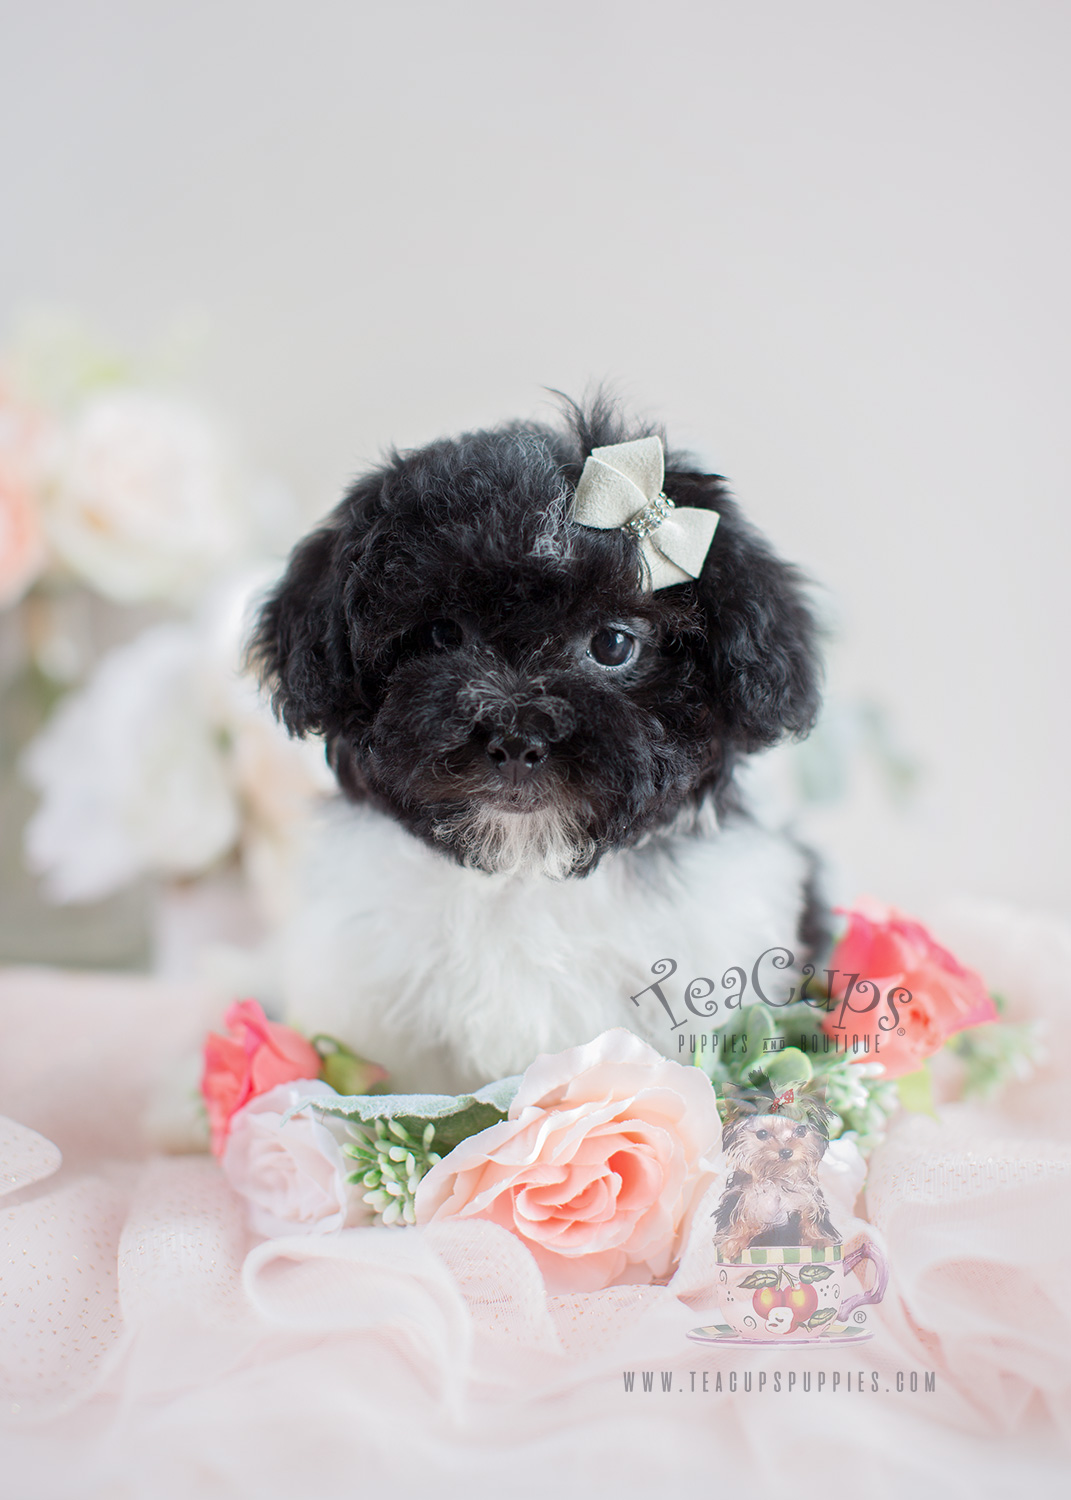 Teacup Poodles and Toy Poodles For Sale